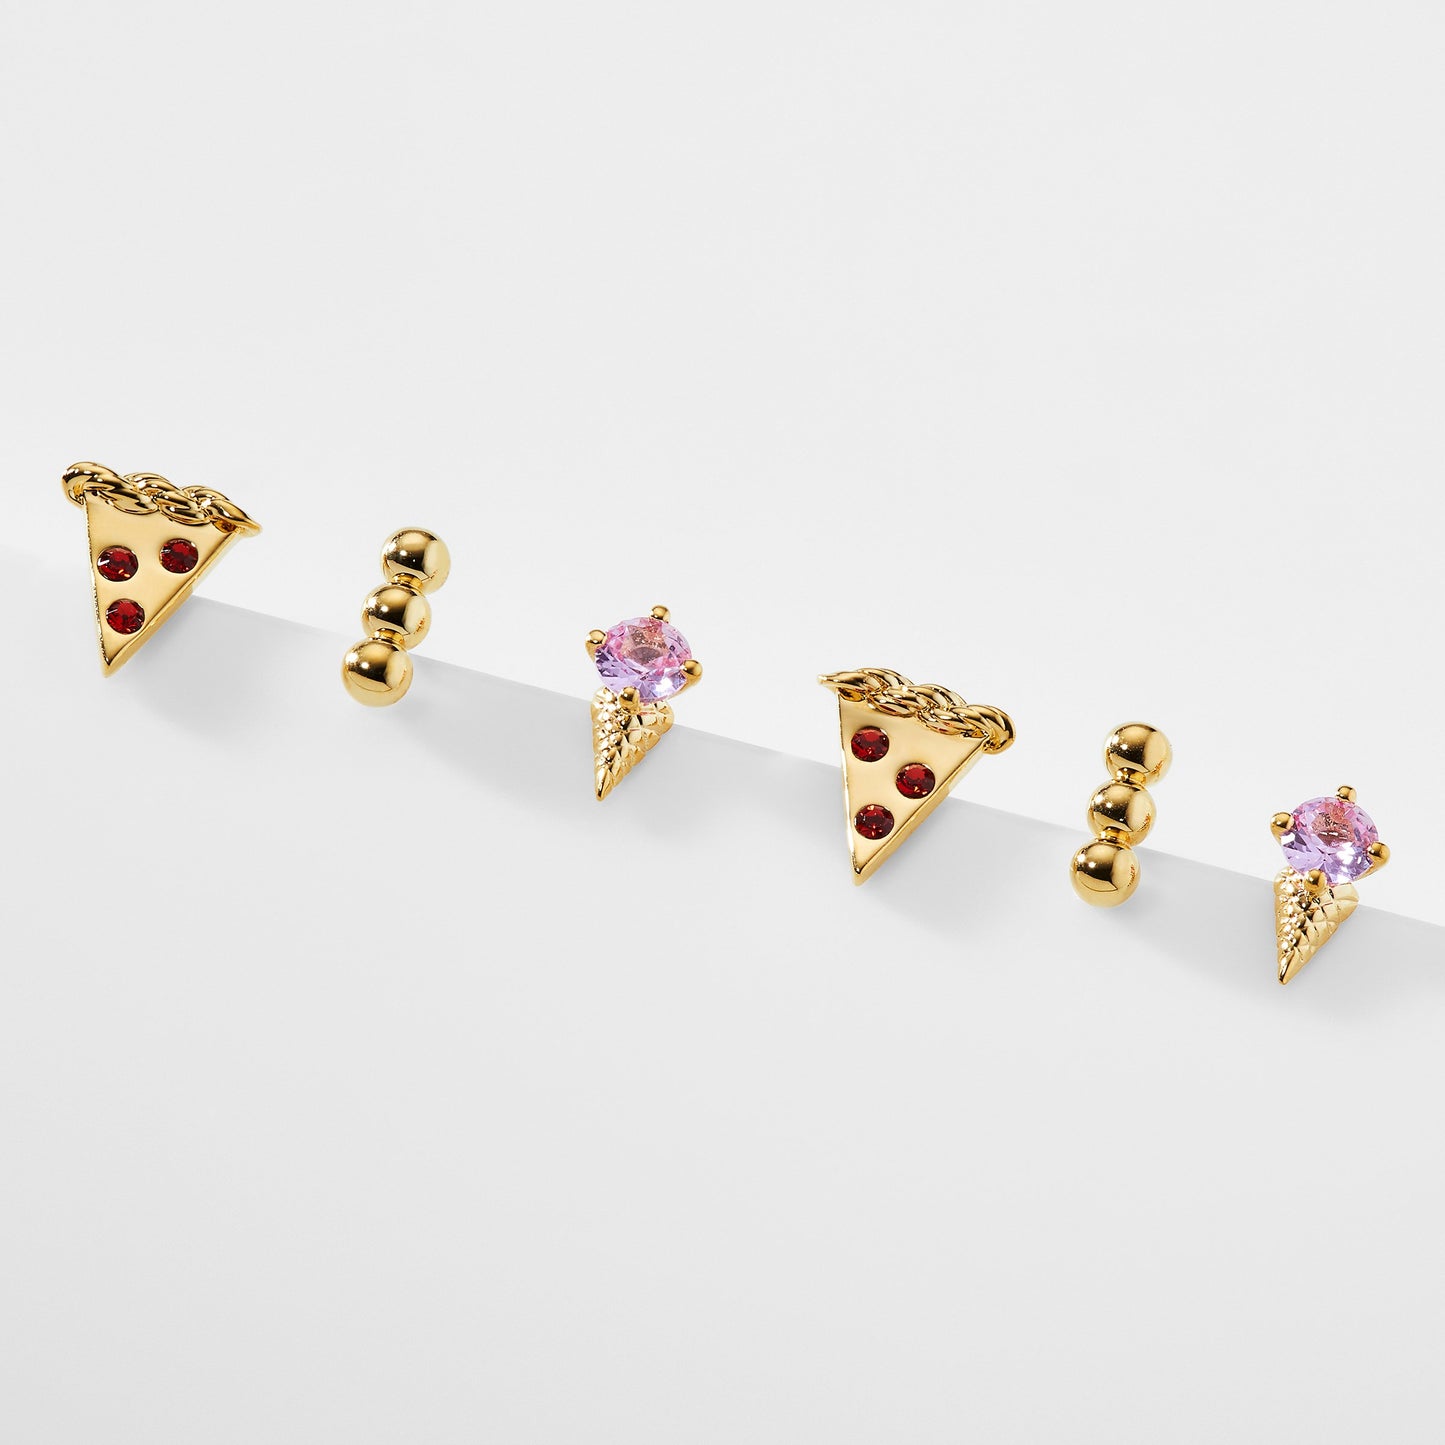 Gold pizza, ice cream cone, and metal bead stud earrings